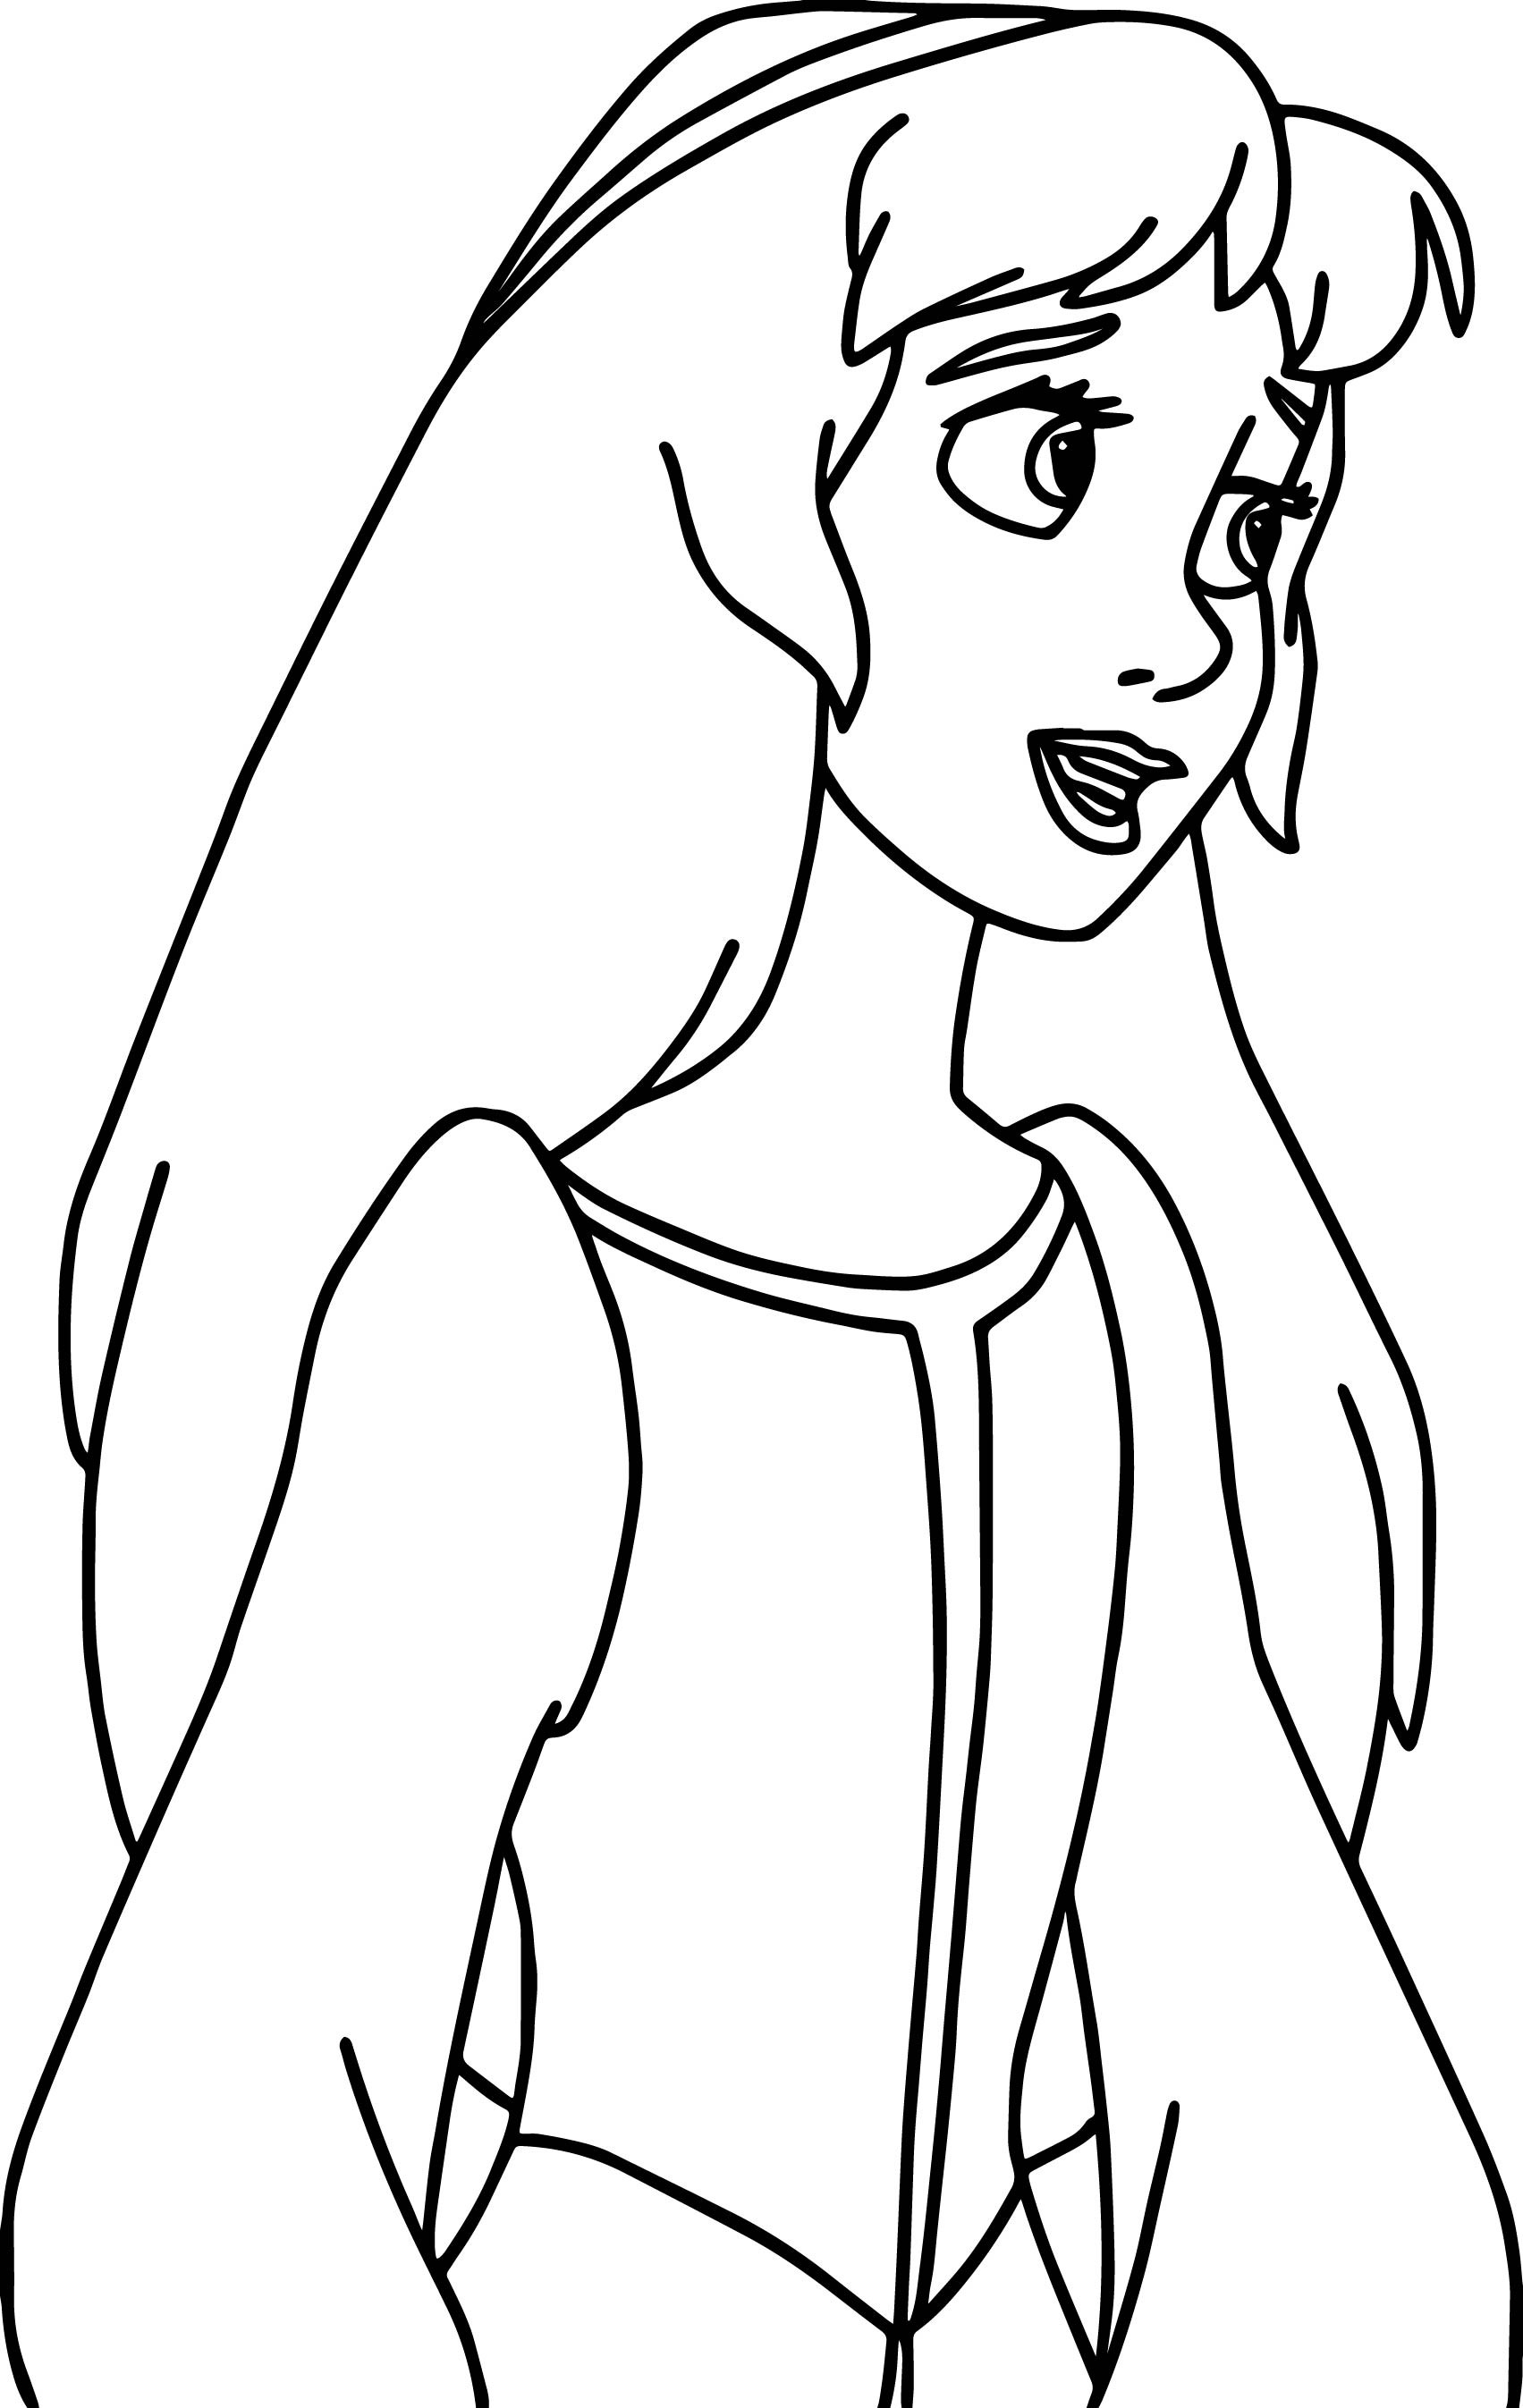 Black Girl Coloring Pages
 The Black Cauldron Eilonwy Pretty Girl Coloring Page